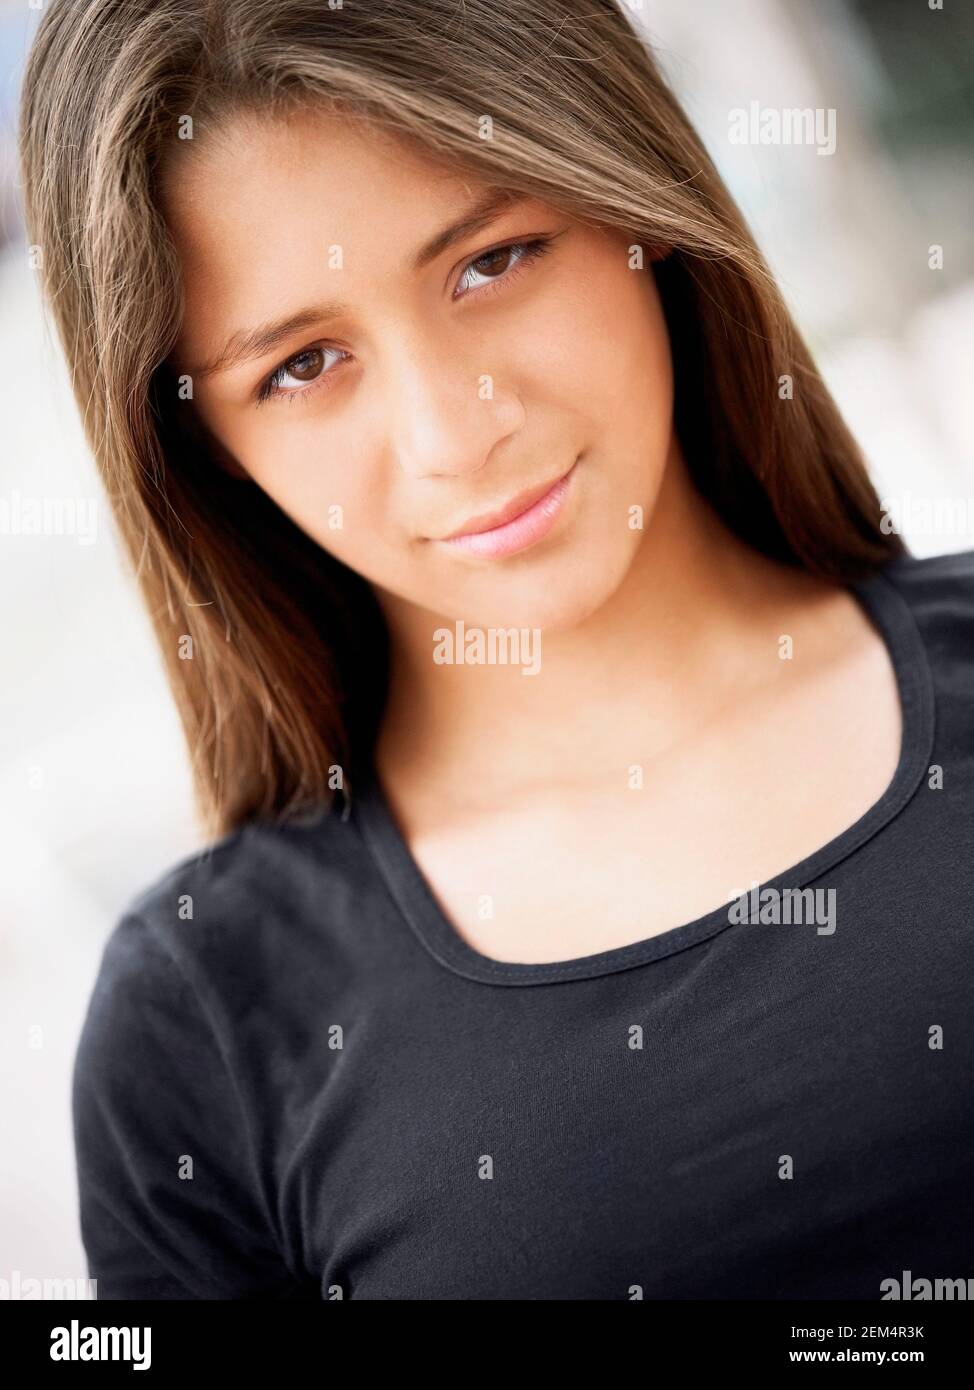 Portrait of a girl smiling Stock Photo